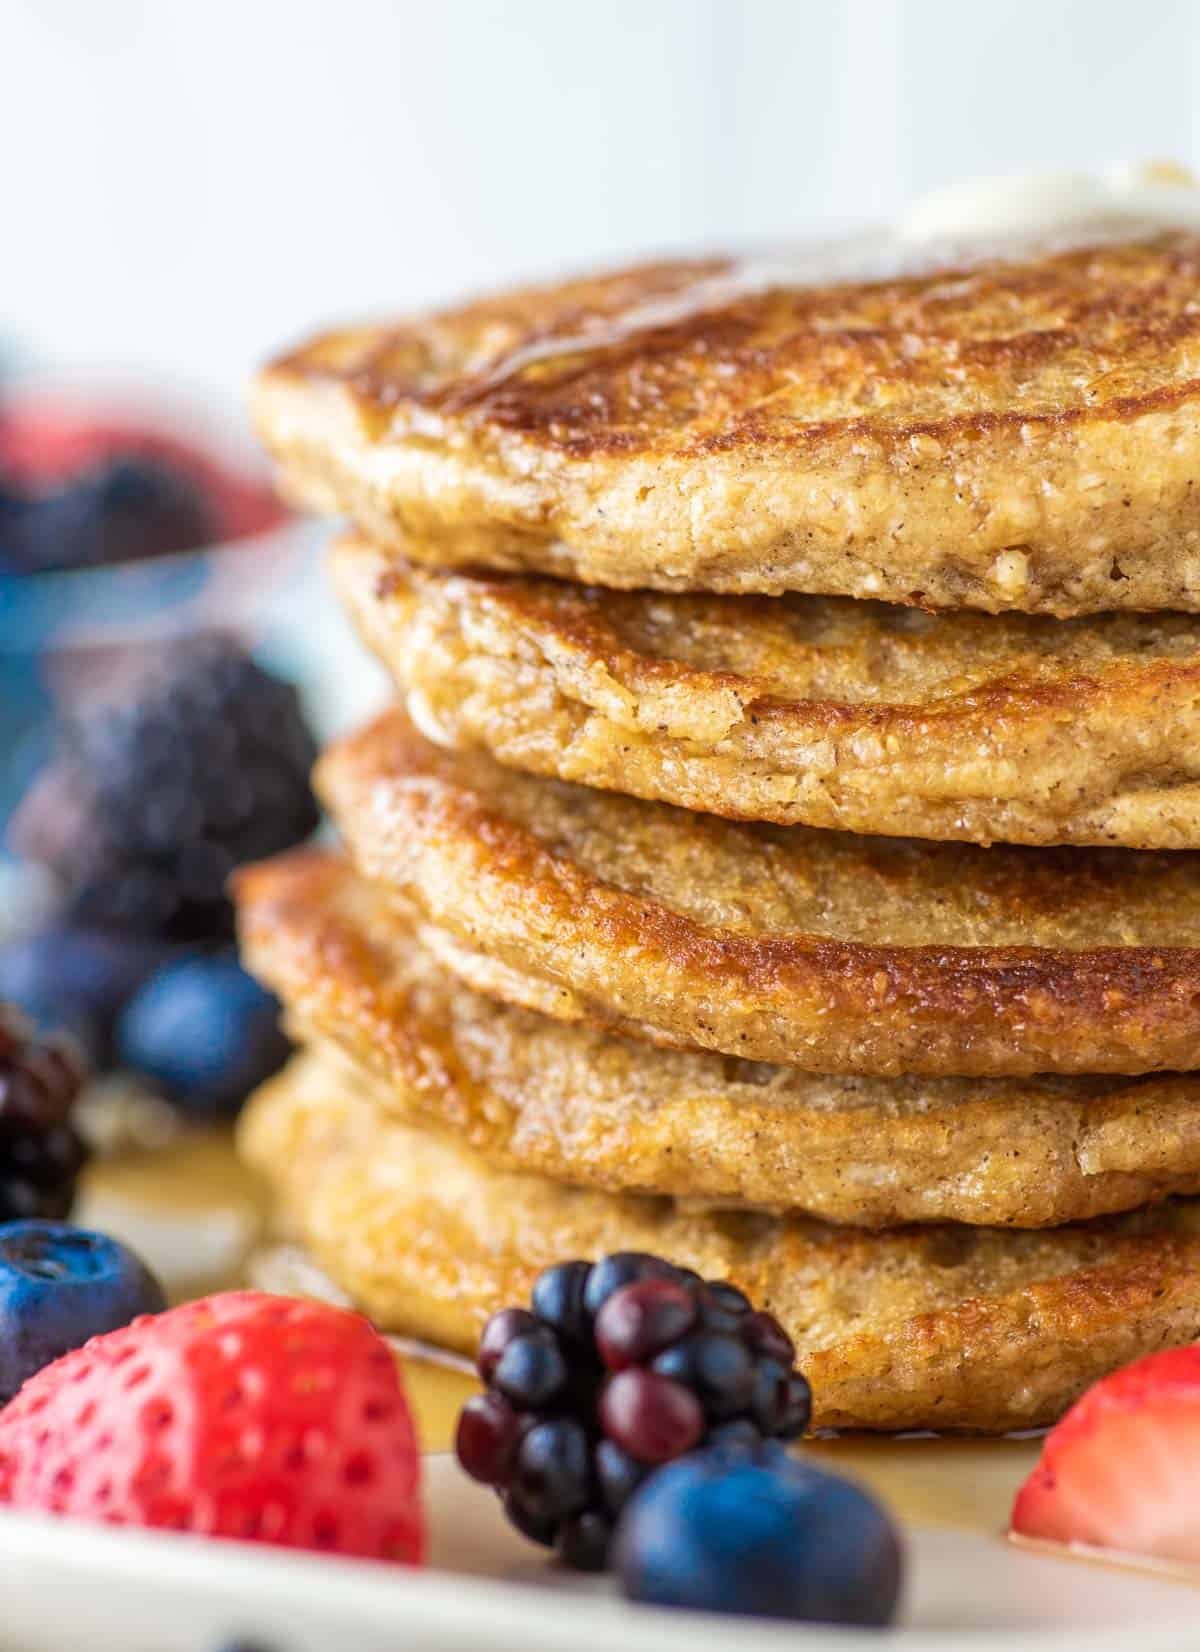 stacked pancakes with oat flour on plate and fruit